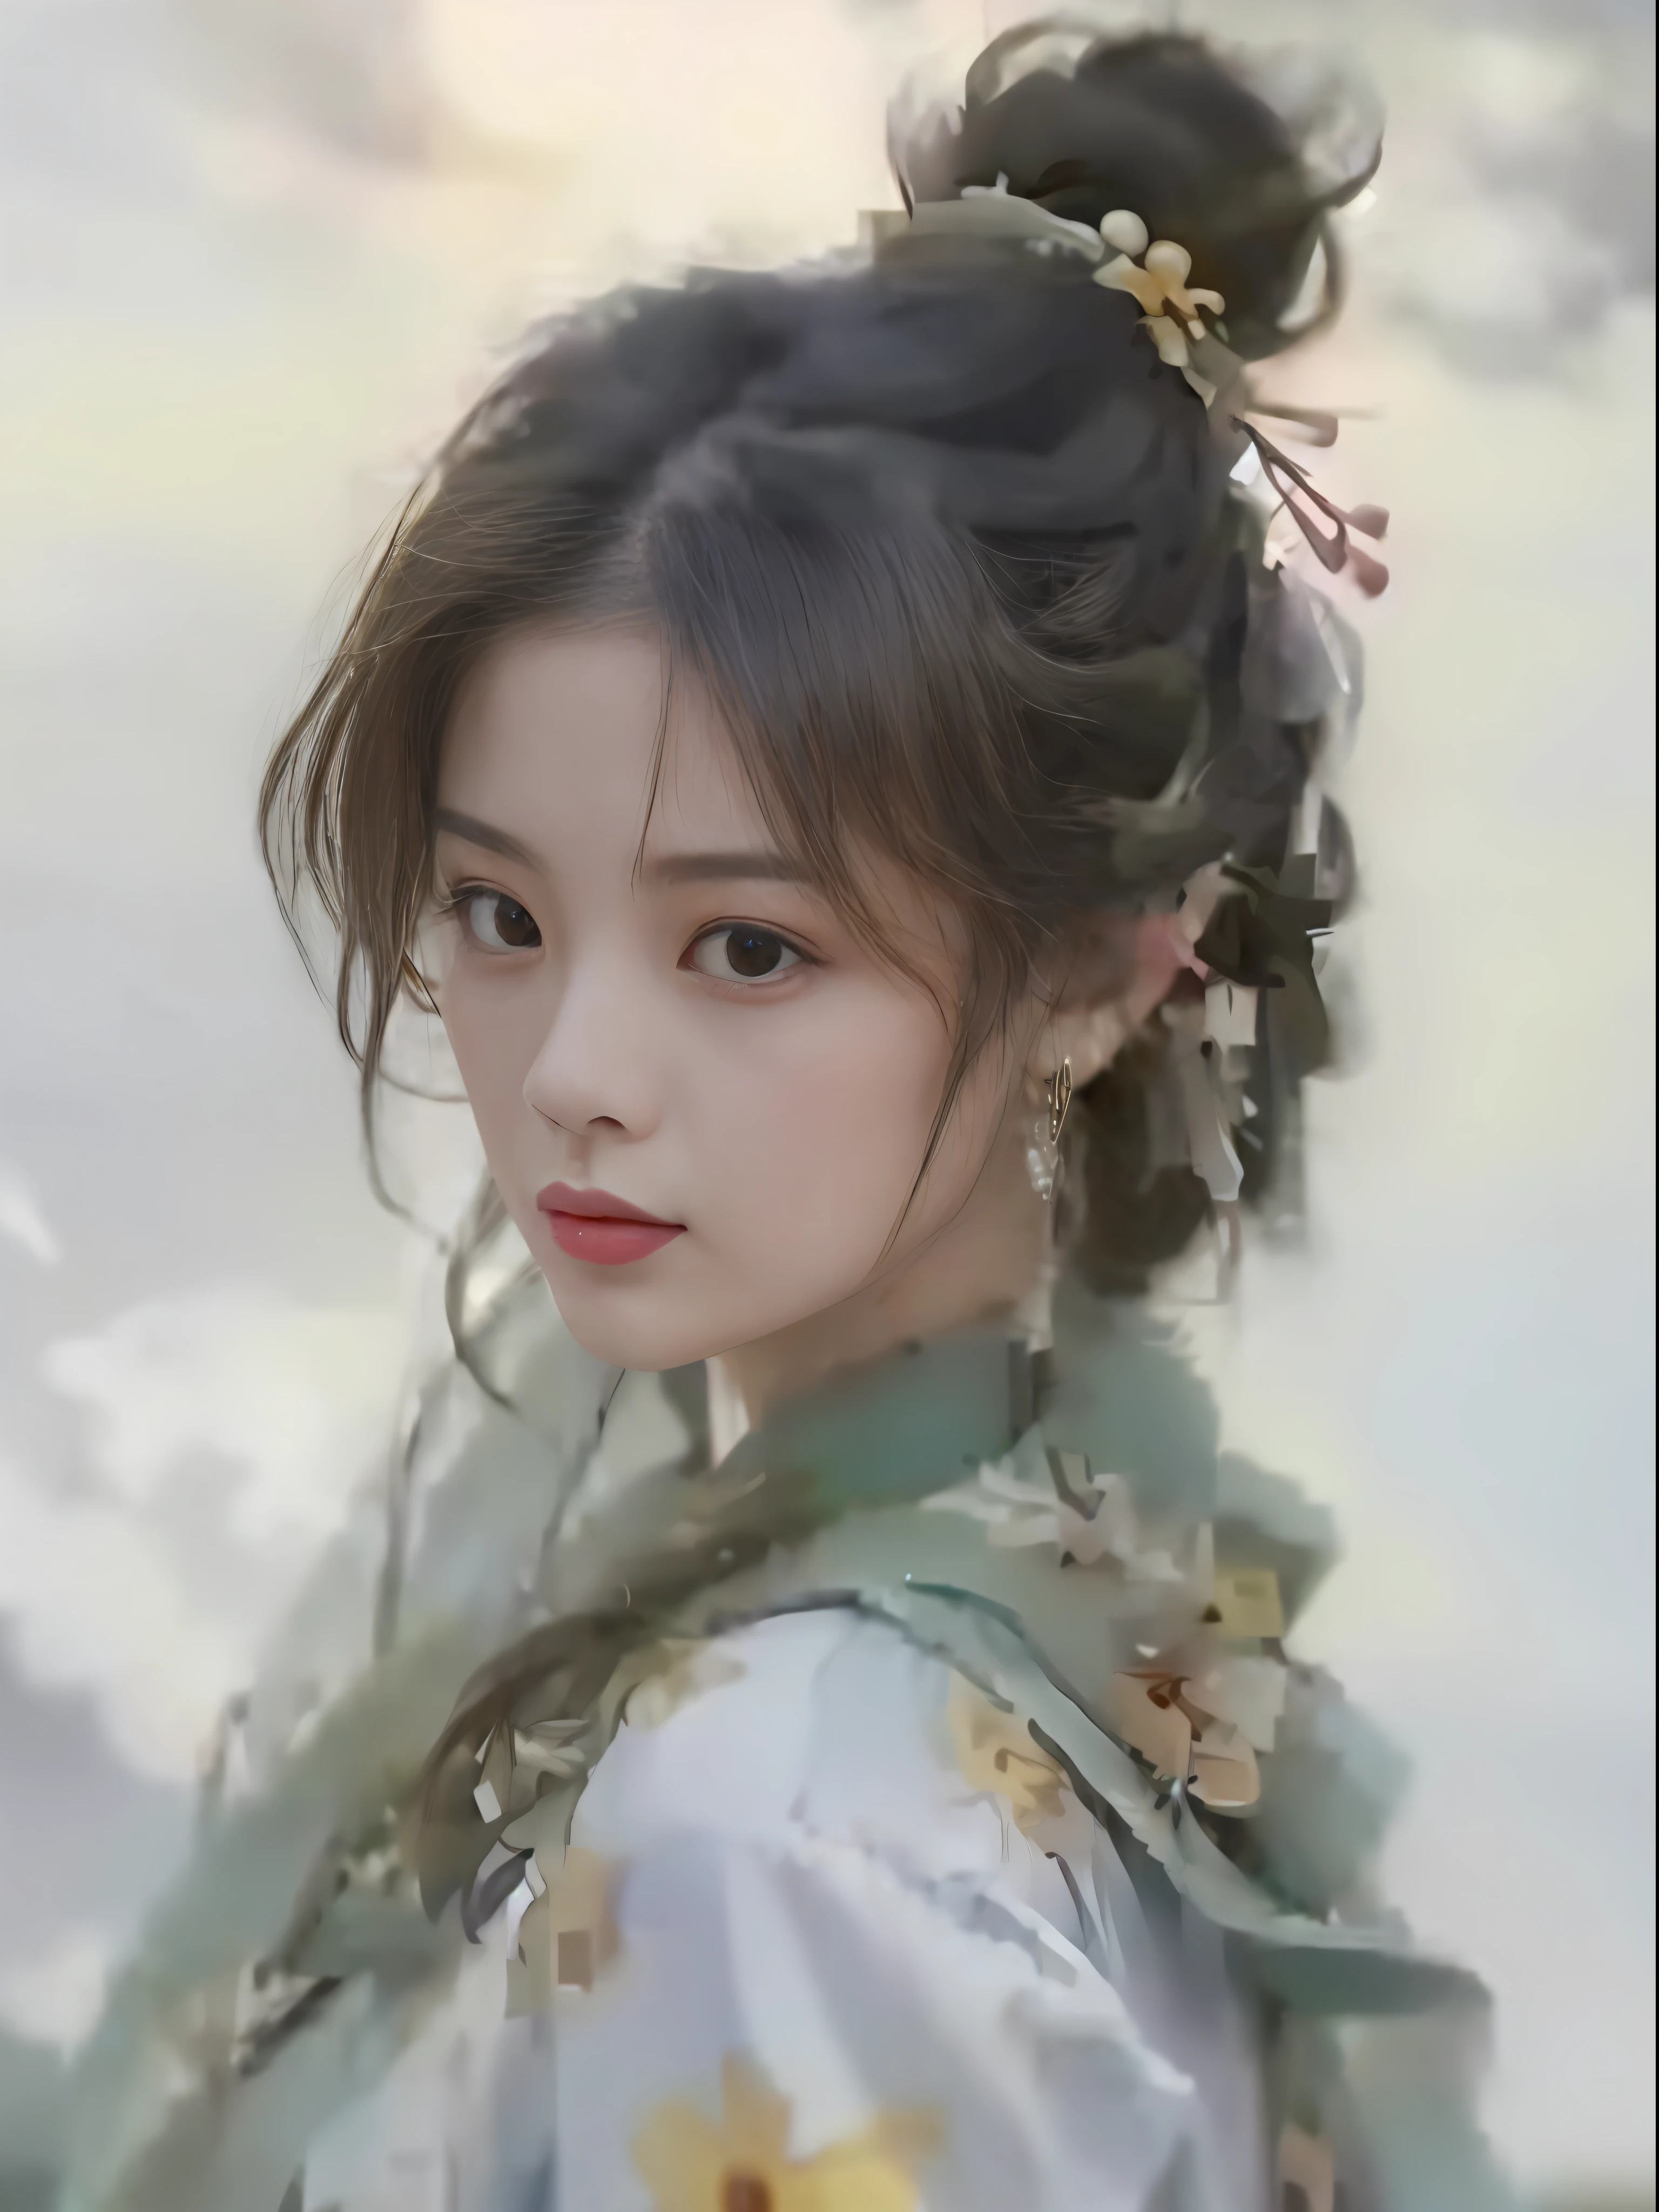 a close up of a drawing of a woman in a kimono，In the background are the sky, inspired by Du Qiong, Traditional beauty, Chinese girl, Inspired by Lan Ying, Inspired by Qiu Ying, gorgeous chinese models, Beautiful character painting, Guviz-style artwork, Palace ， A girl in Hanfu, in the art style of bowater, Inspired by Huang Ji